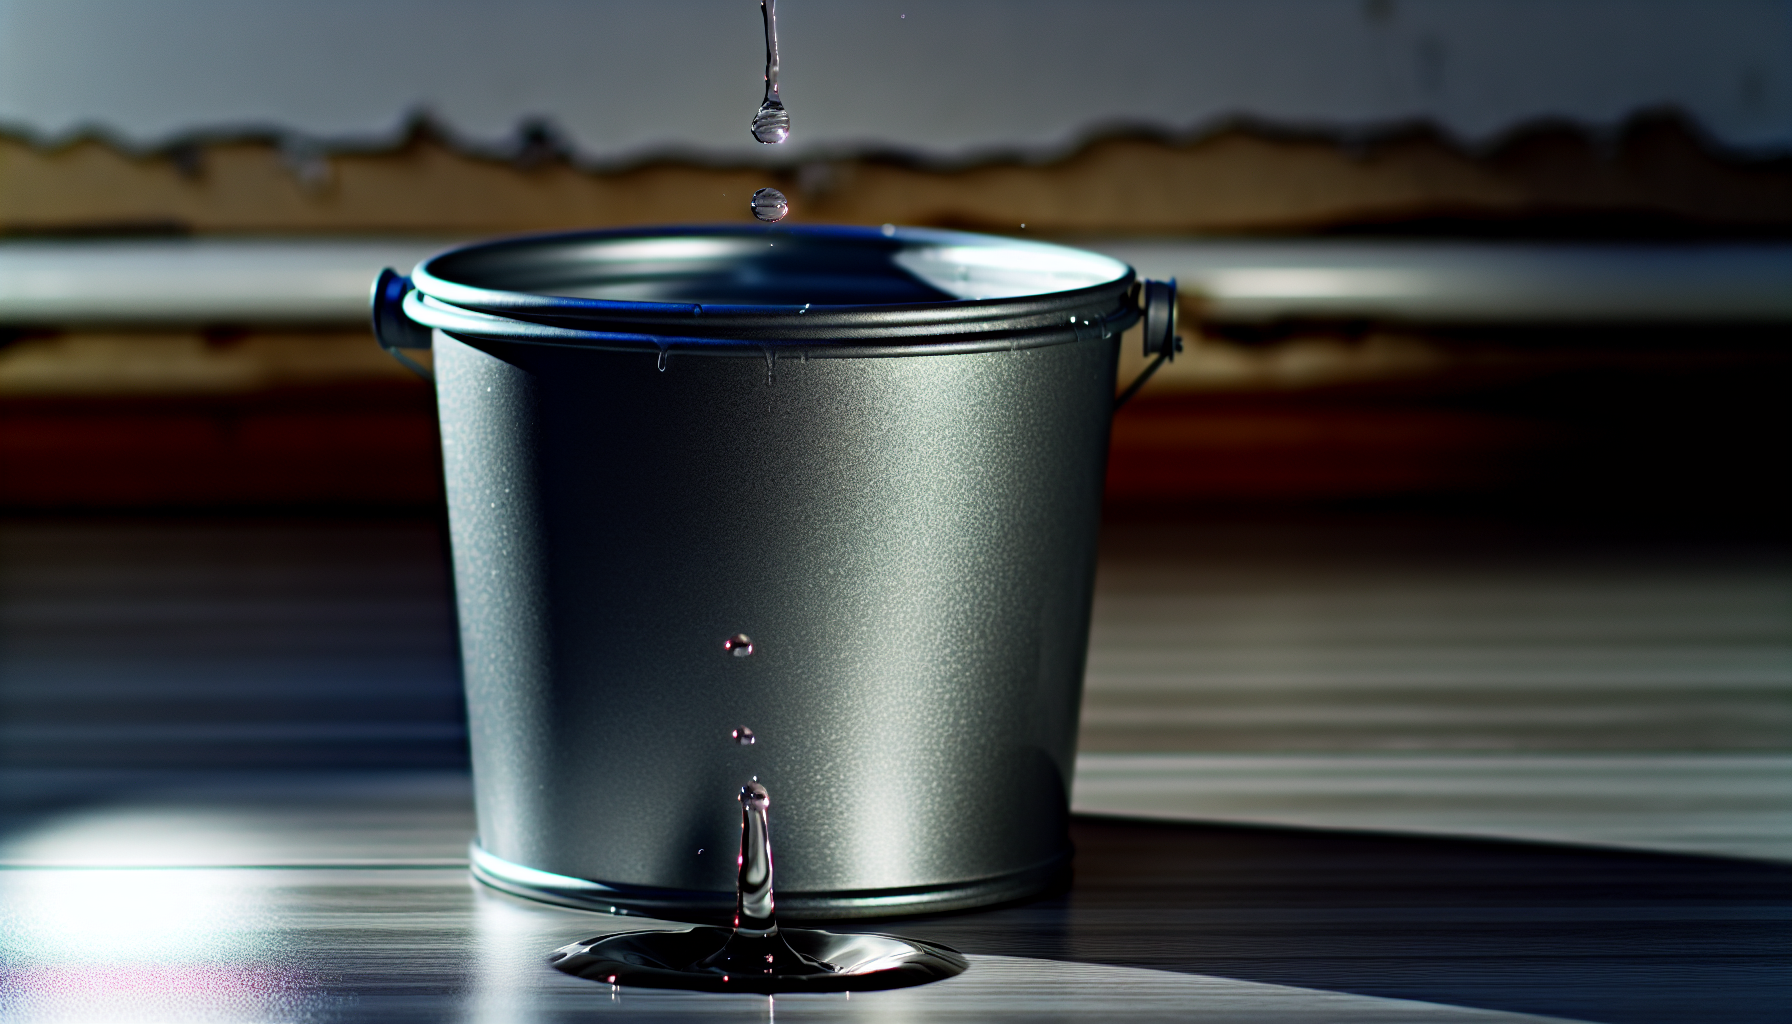 Water dripping into a bucket